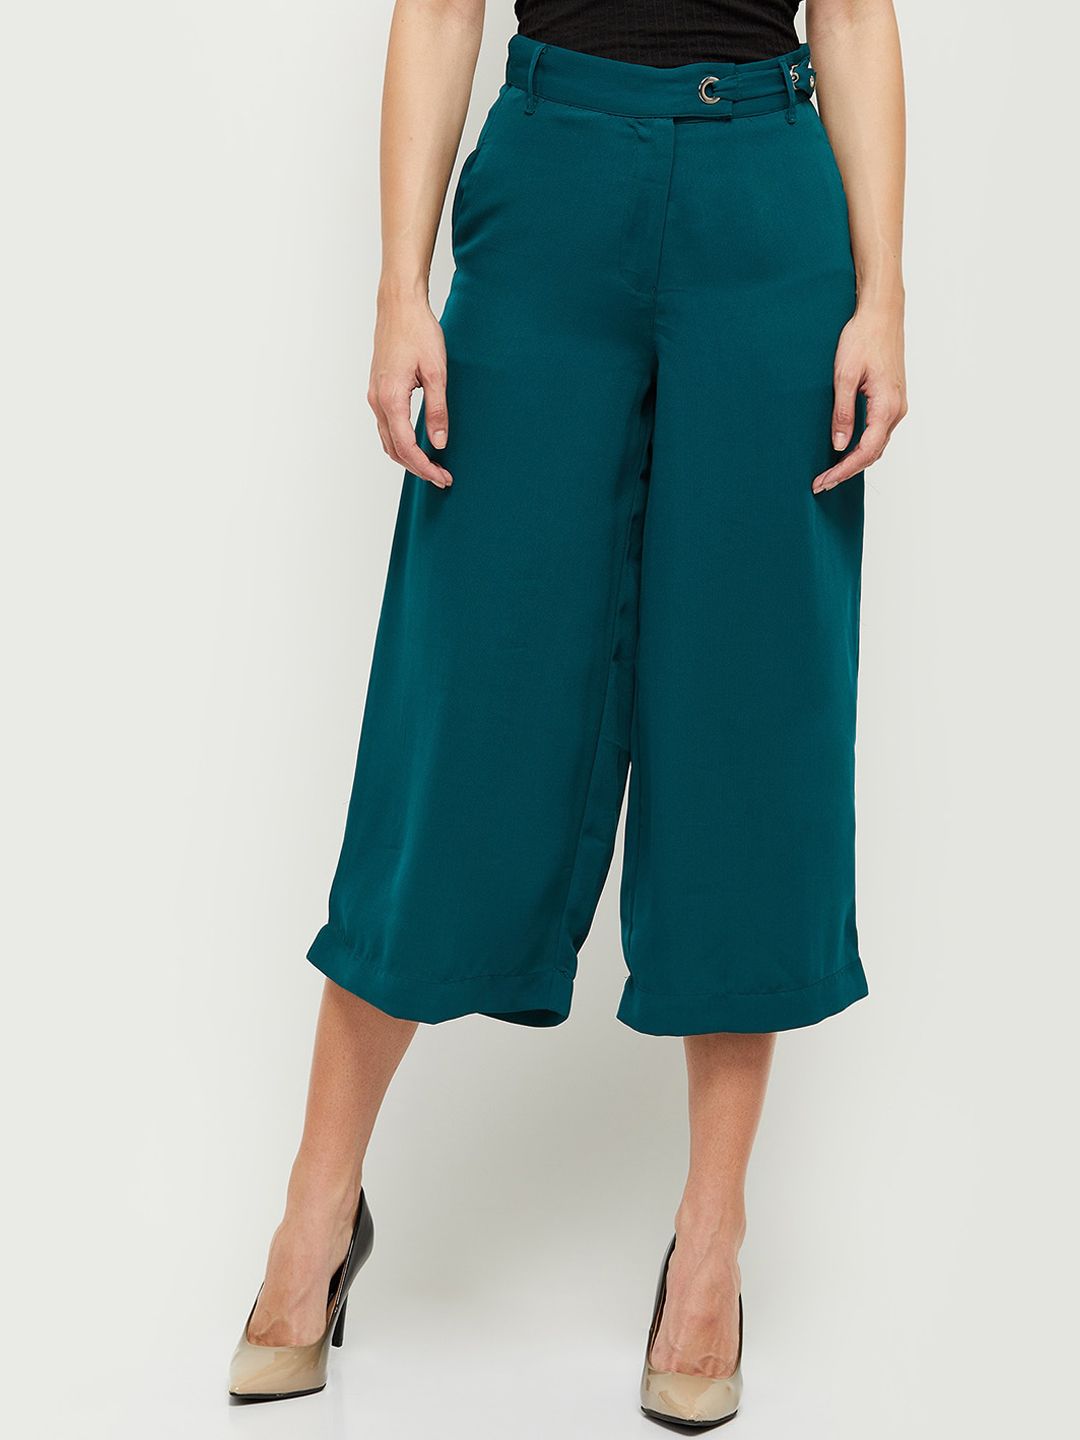 max Women Teal Solid Culottes Trousers Price in India